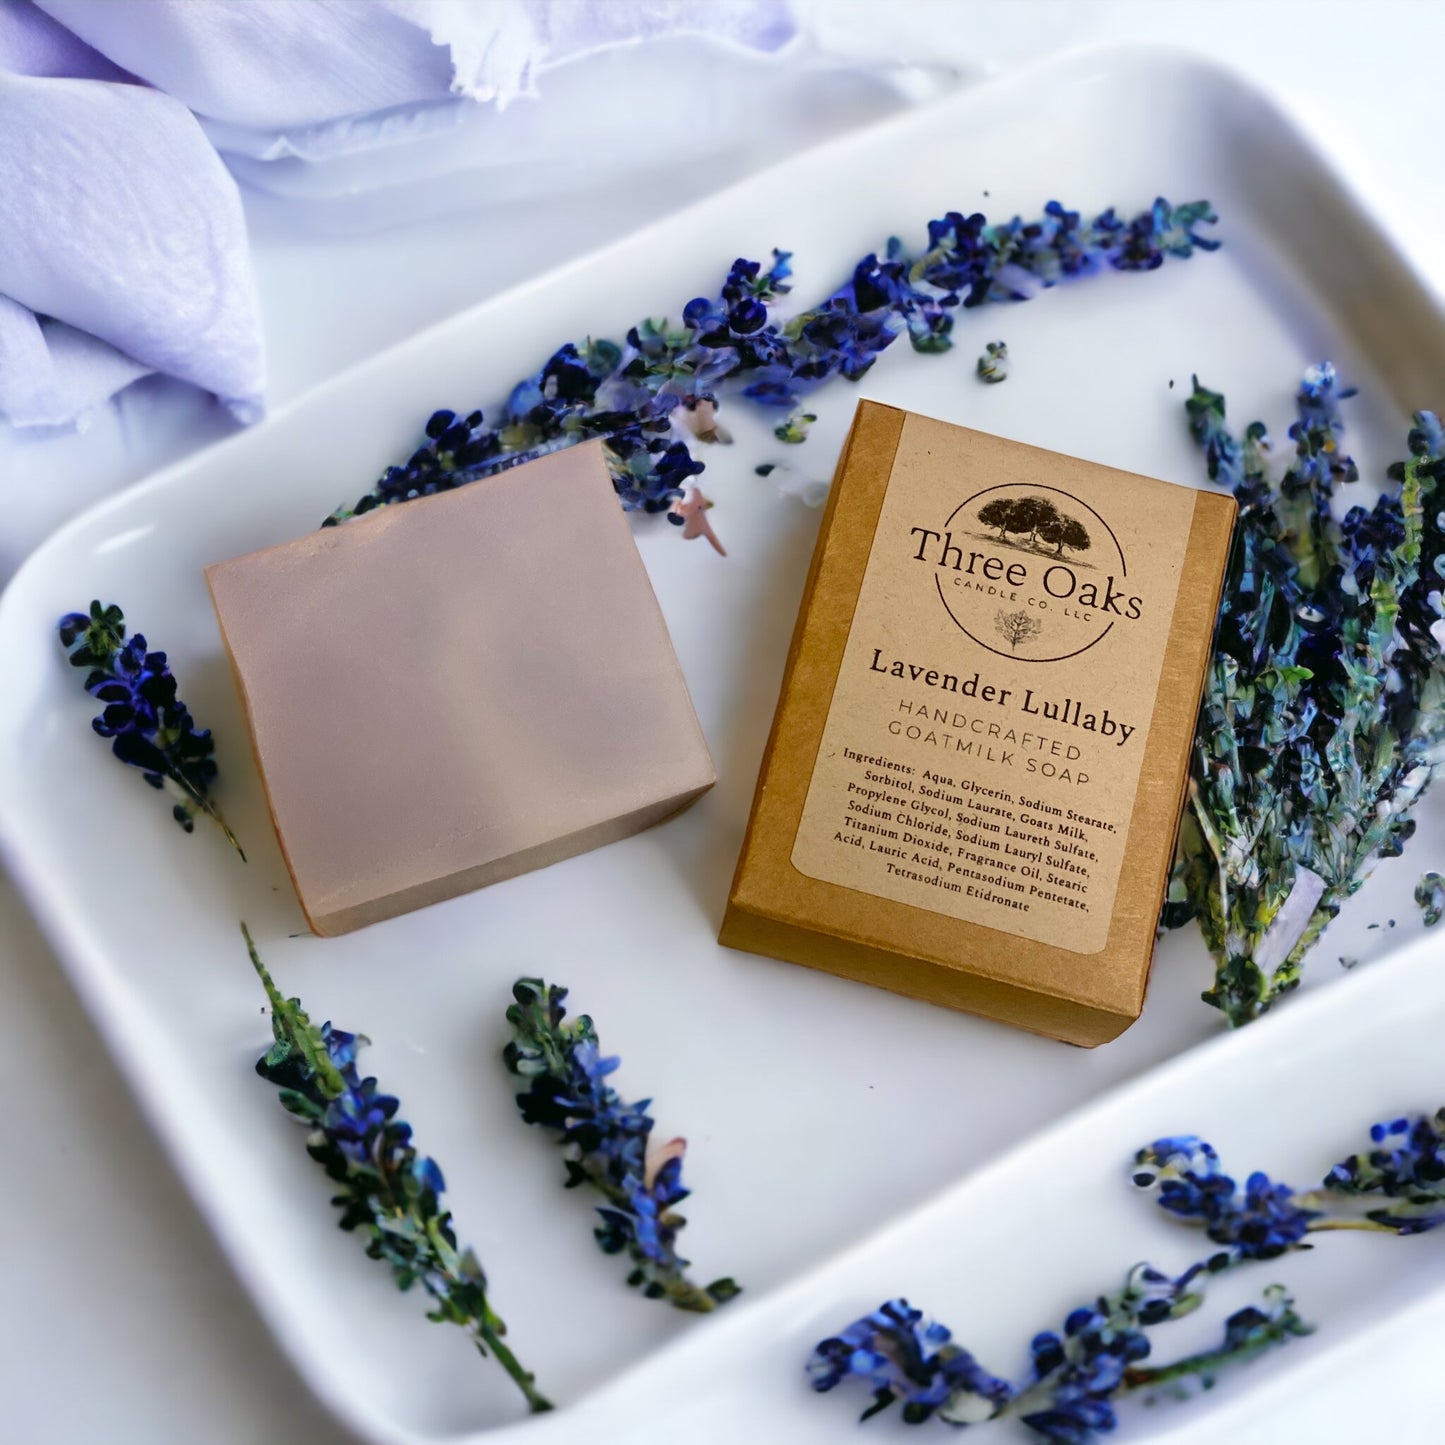 Lavender Lullaby Soap